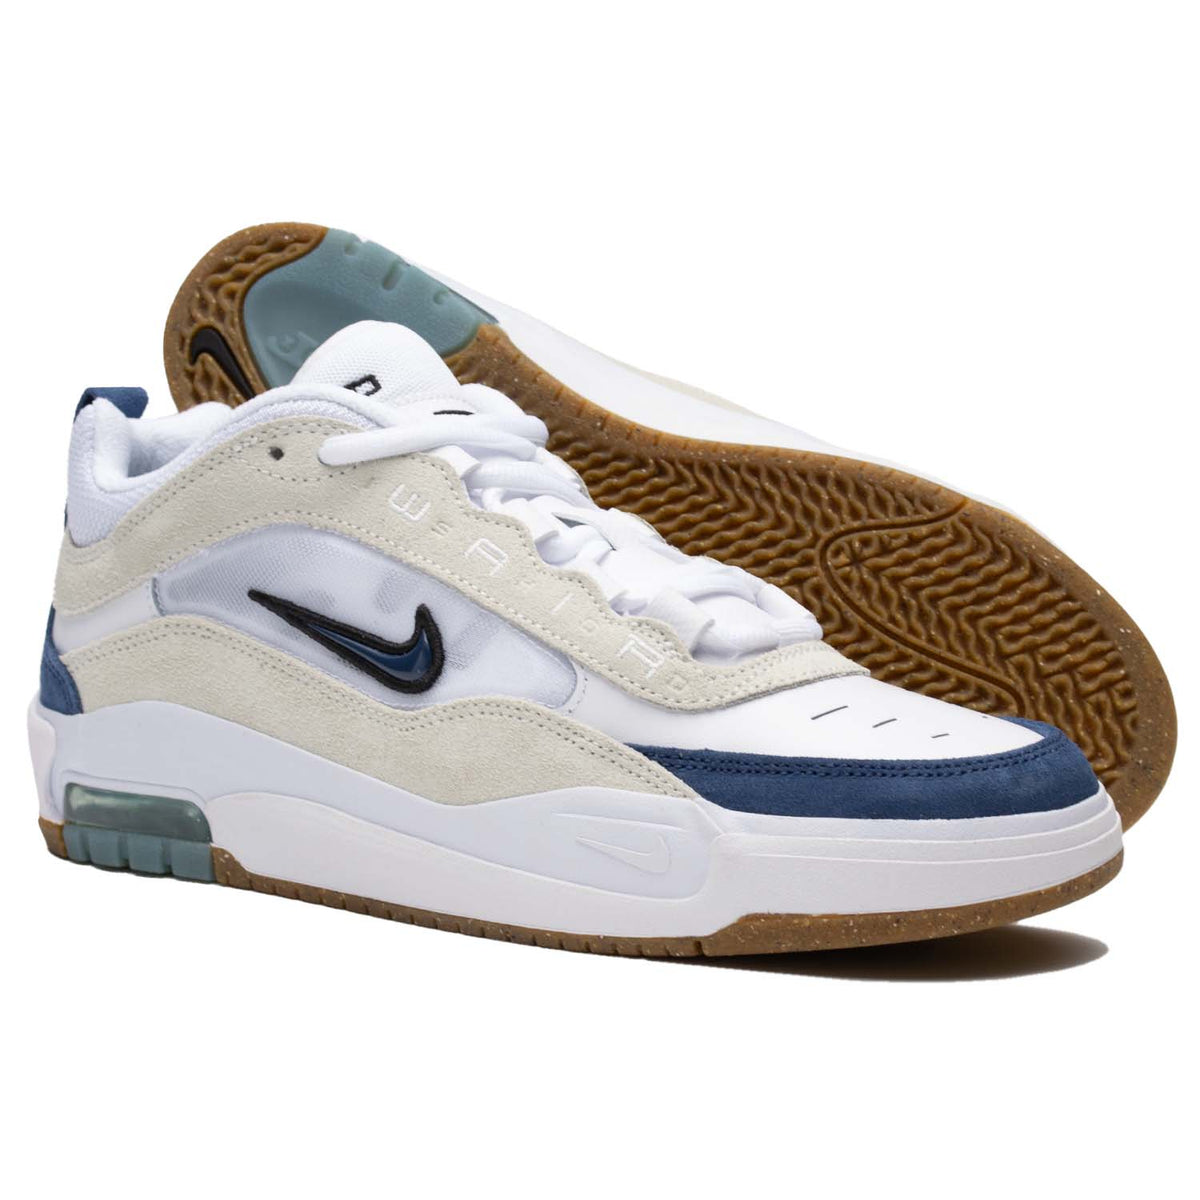 Nike SB - Air Max Ishod: &#39;90s basketball-inspired, durable for intense skating, Max Air technology, flexible cupsole, &quot;Ishod&quot; details, &quot;Wair&quot; embroidery, herringbone outsole grip, White/Summit White/Black/Navy, Tinker Hatfield&#39;s Parisian architecture influence for comfort and support.